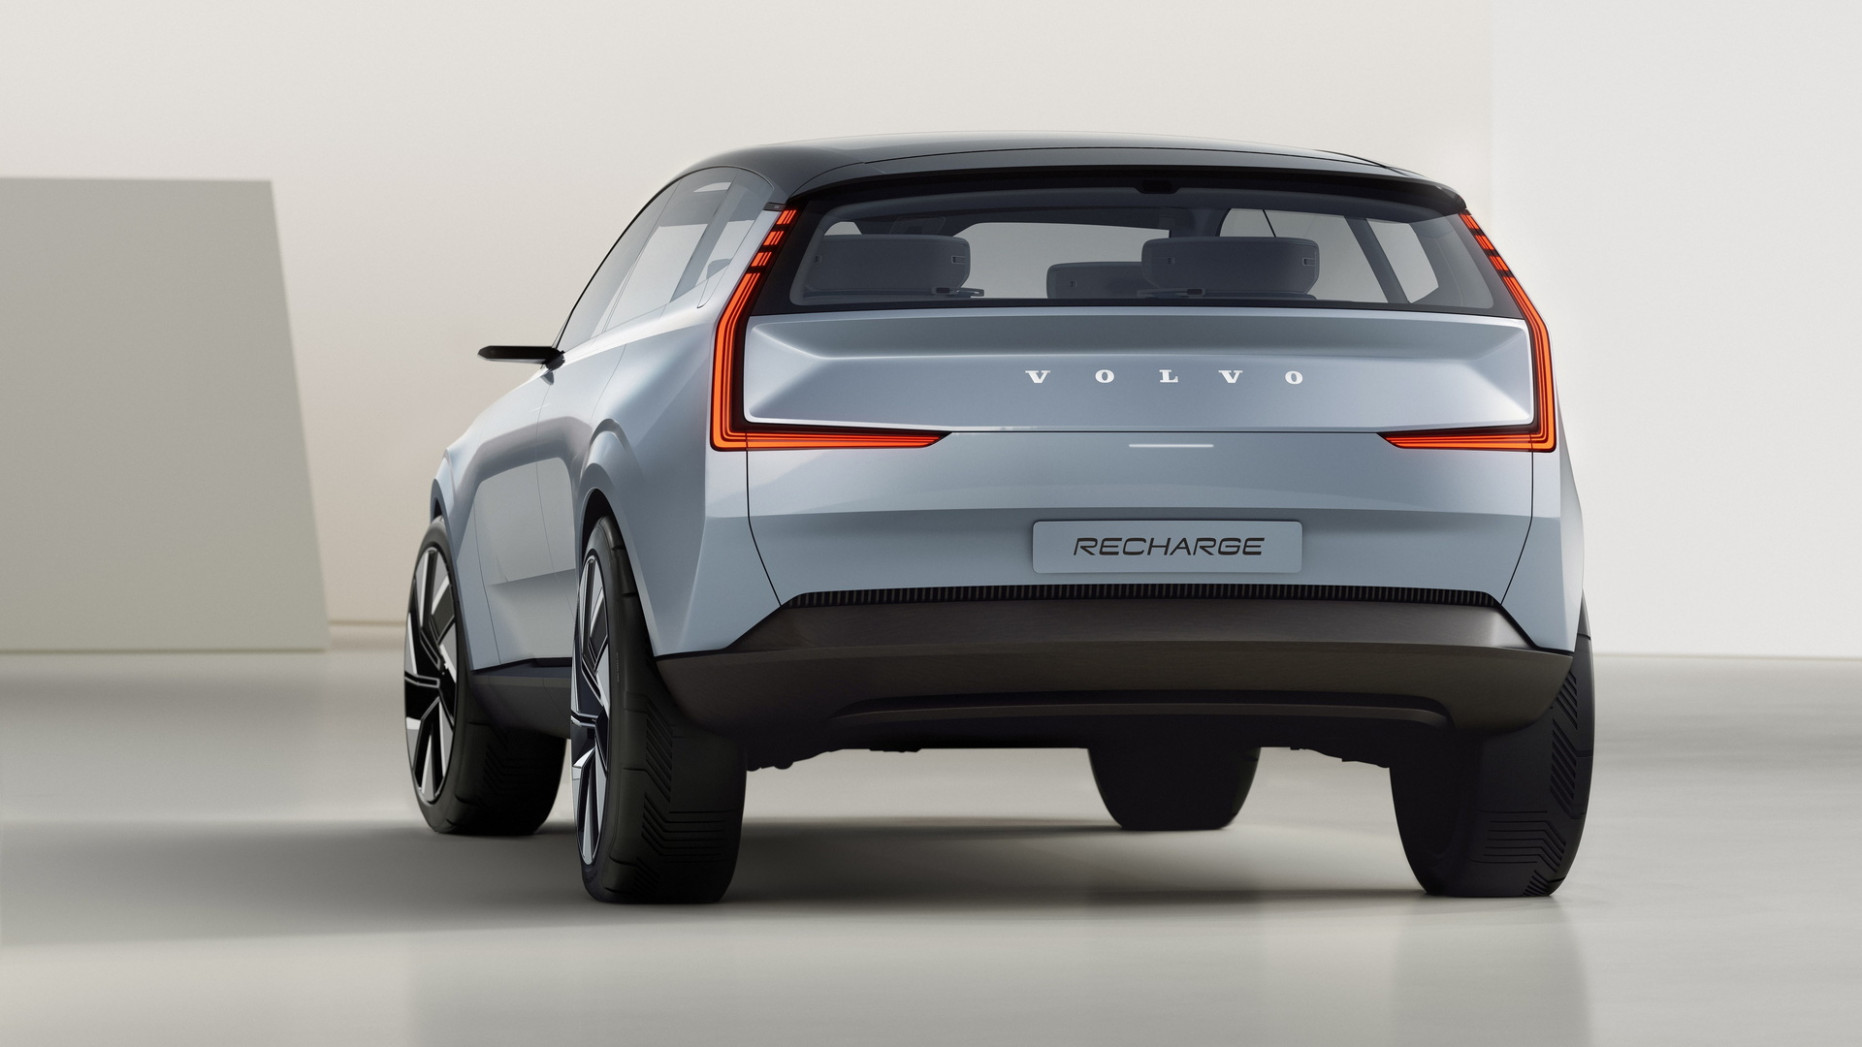 5 Volvo Xc5 Successor To Blend Suv And Estate Styling Cues 2023 Volvo Xc90 Hybrid